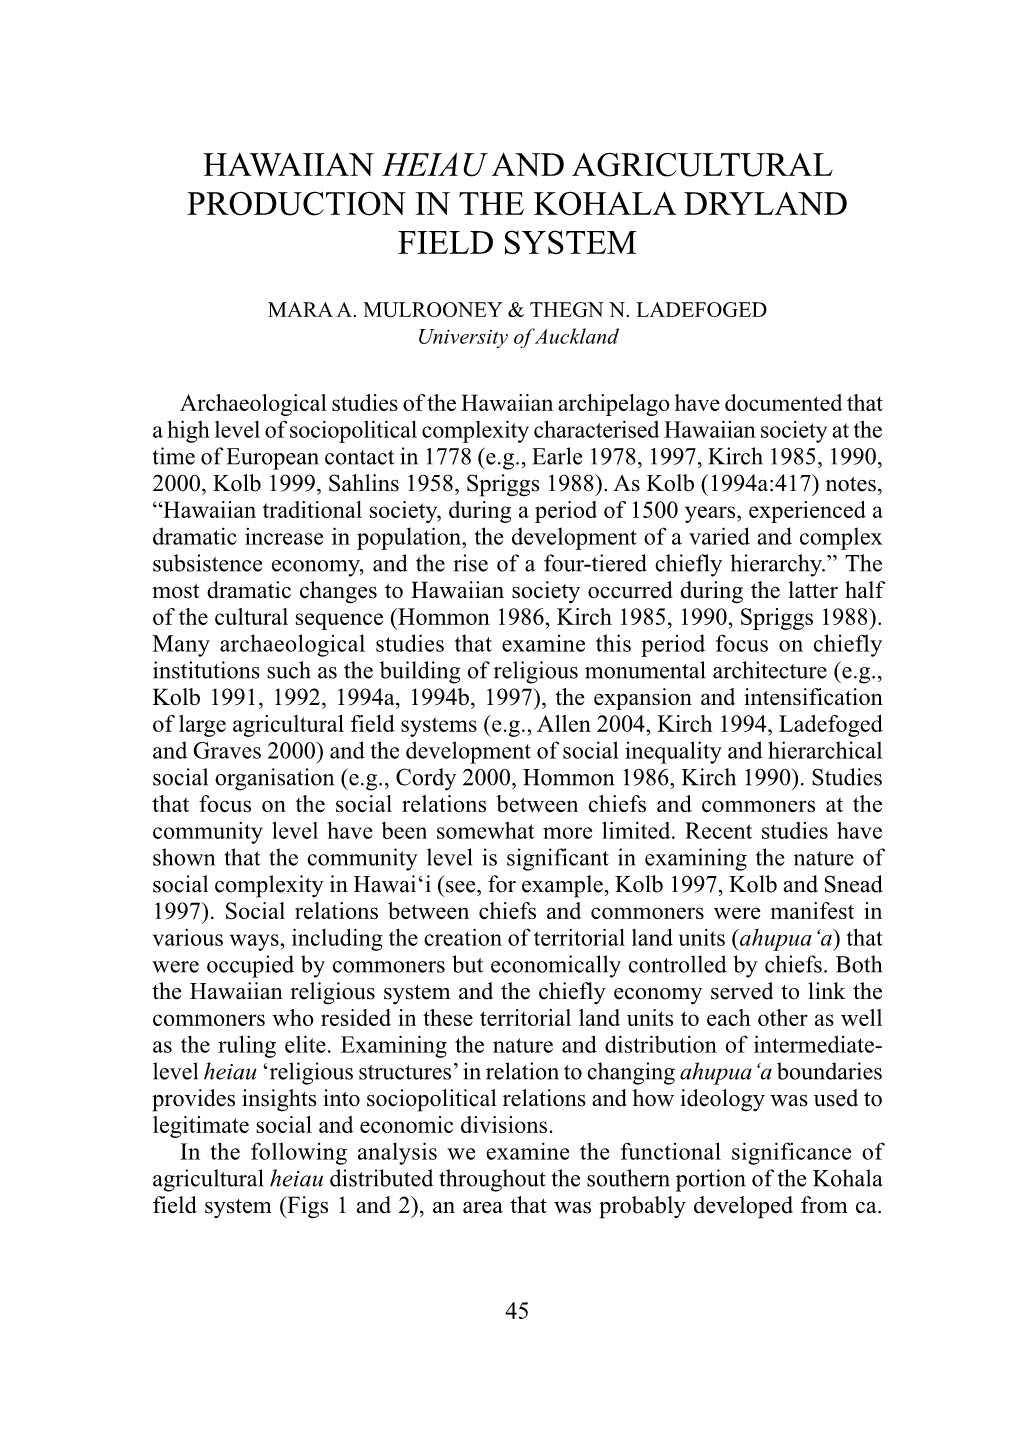 Hawaiian Heiau and Agricultural Production in the Kohala Dryland Field System